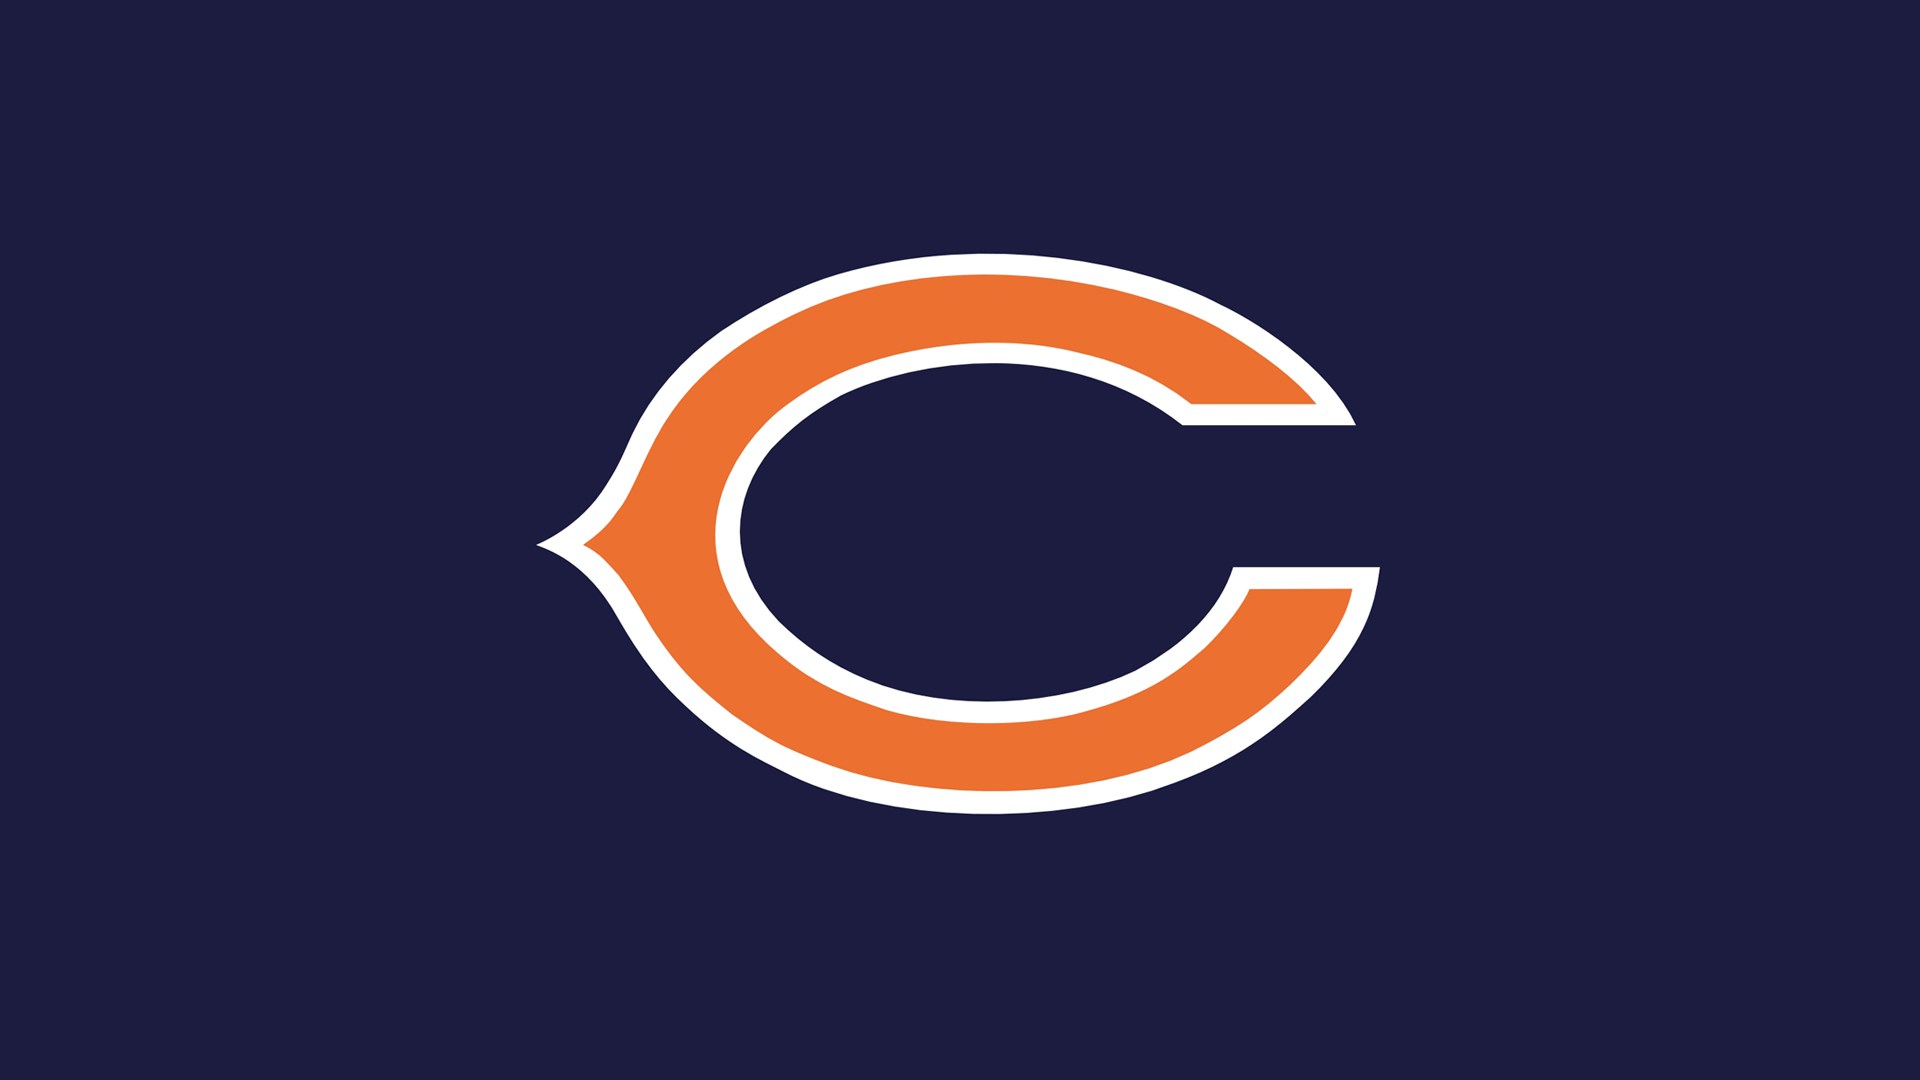 Bears C Logo Pictures To Pin Pinsdaddy